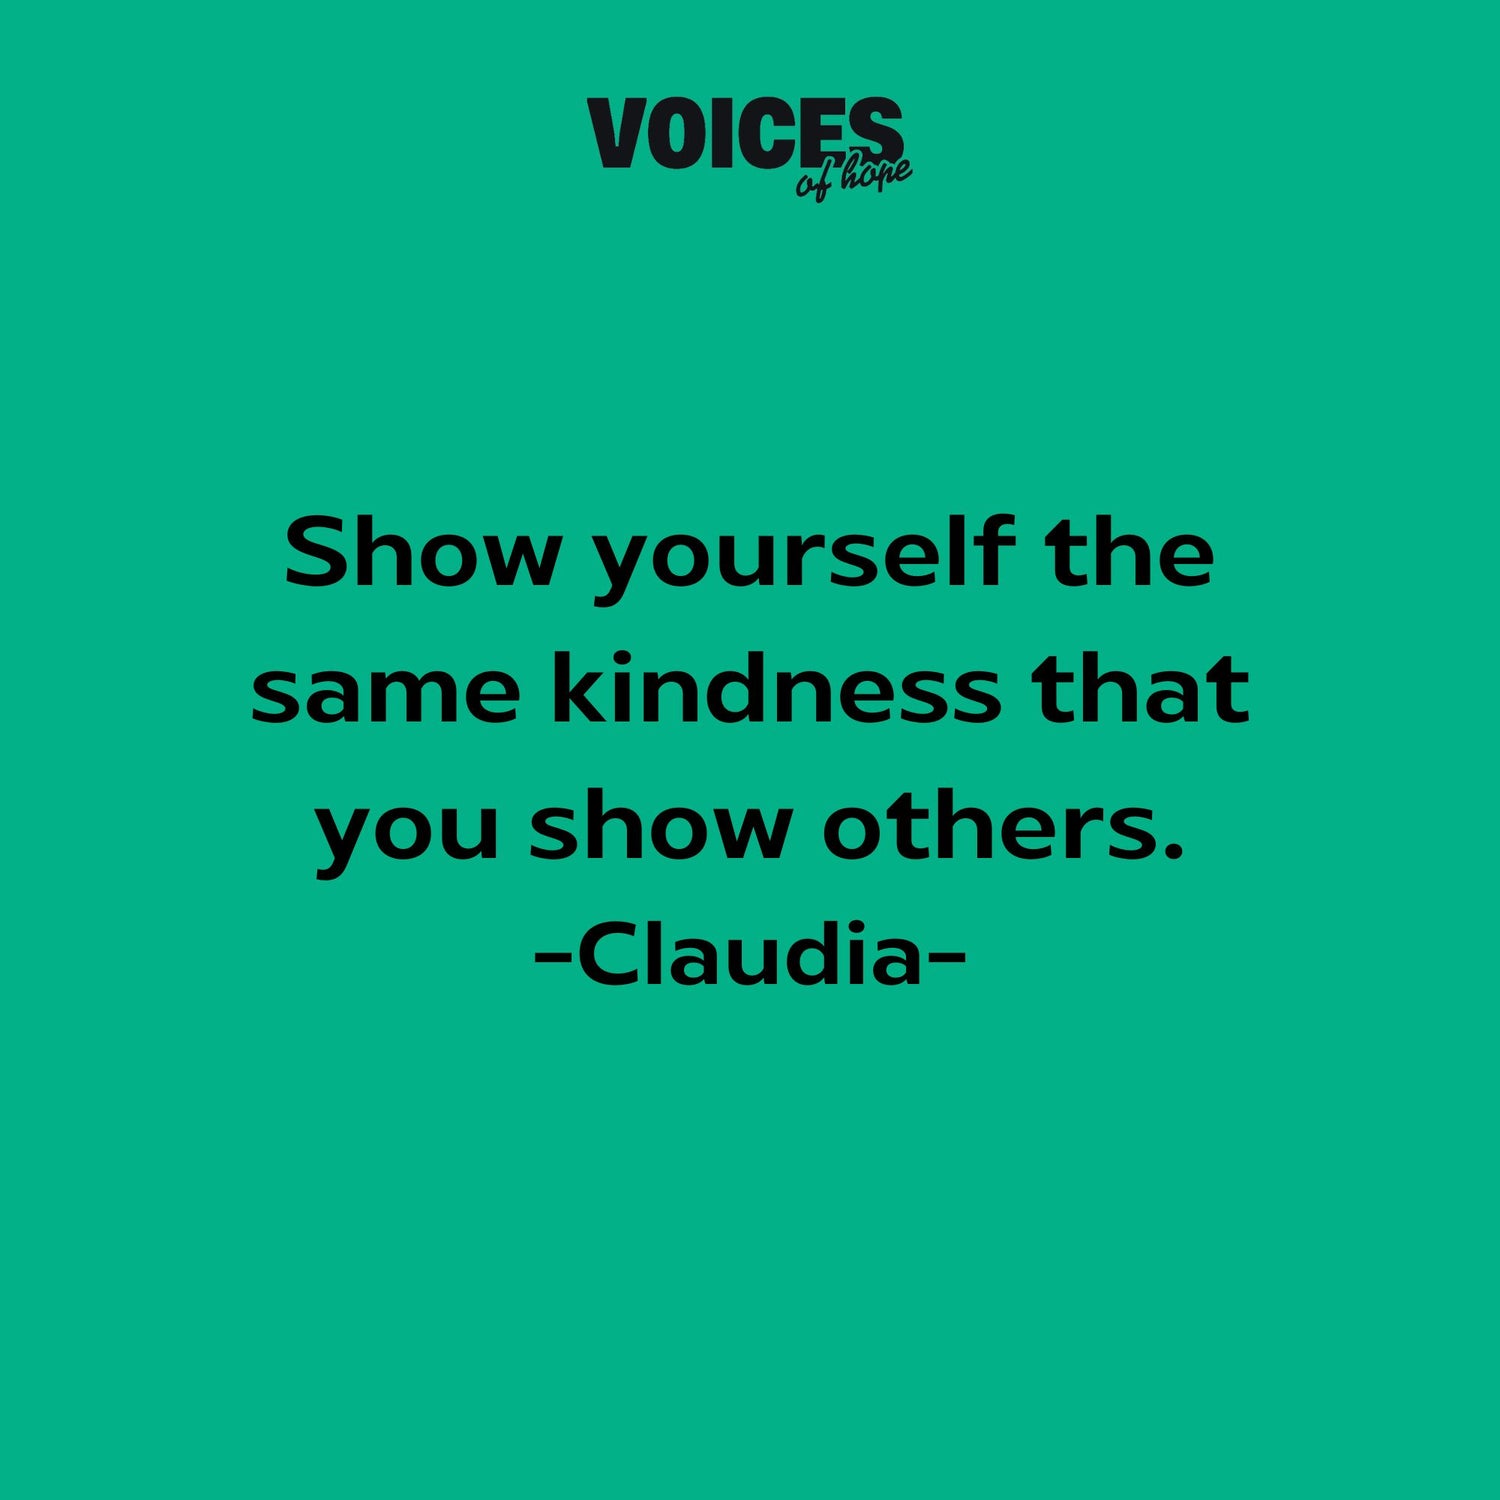 Green background with black writing that reads: "show yourself the same kindness that you show others. Claudia."